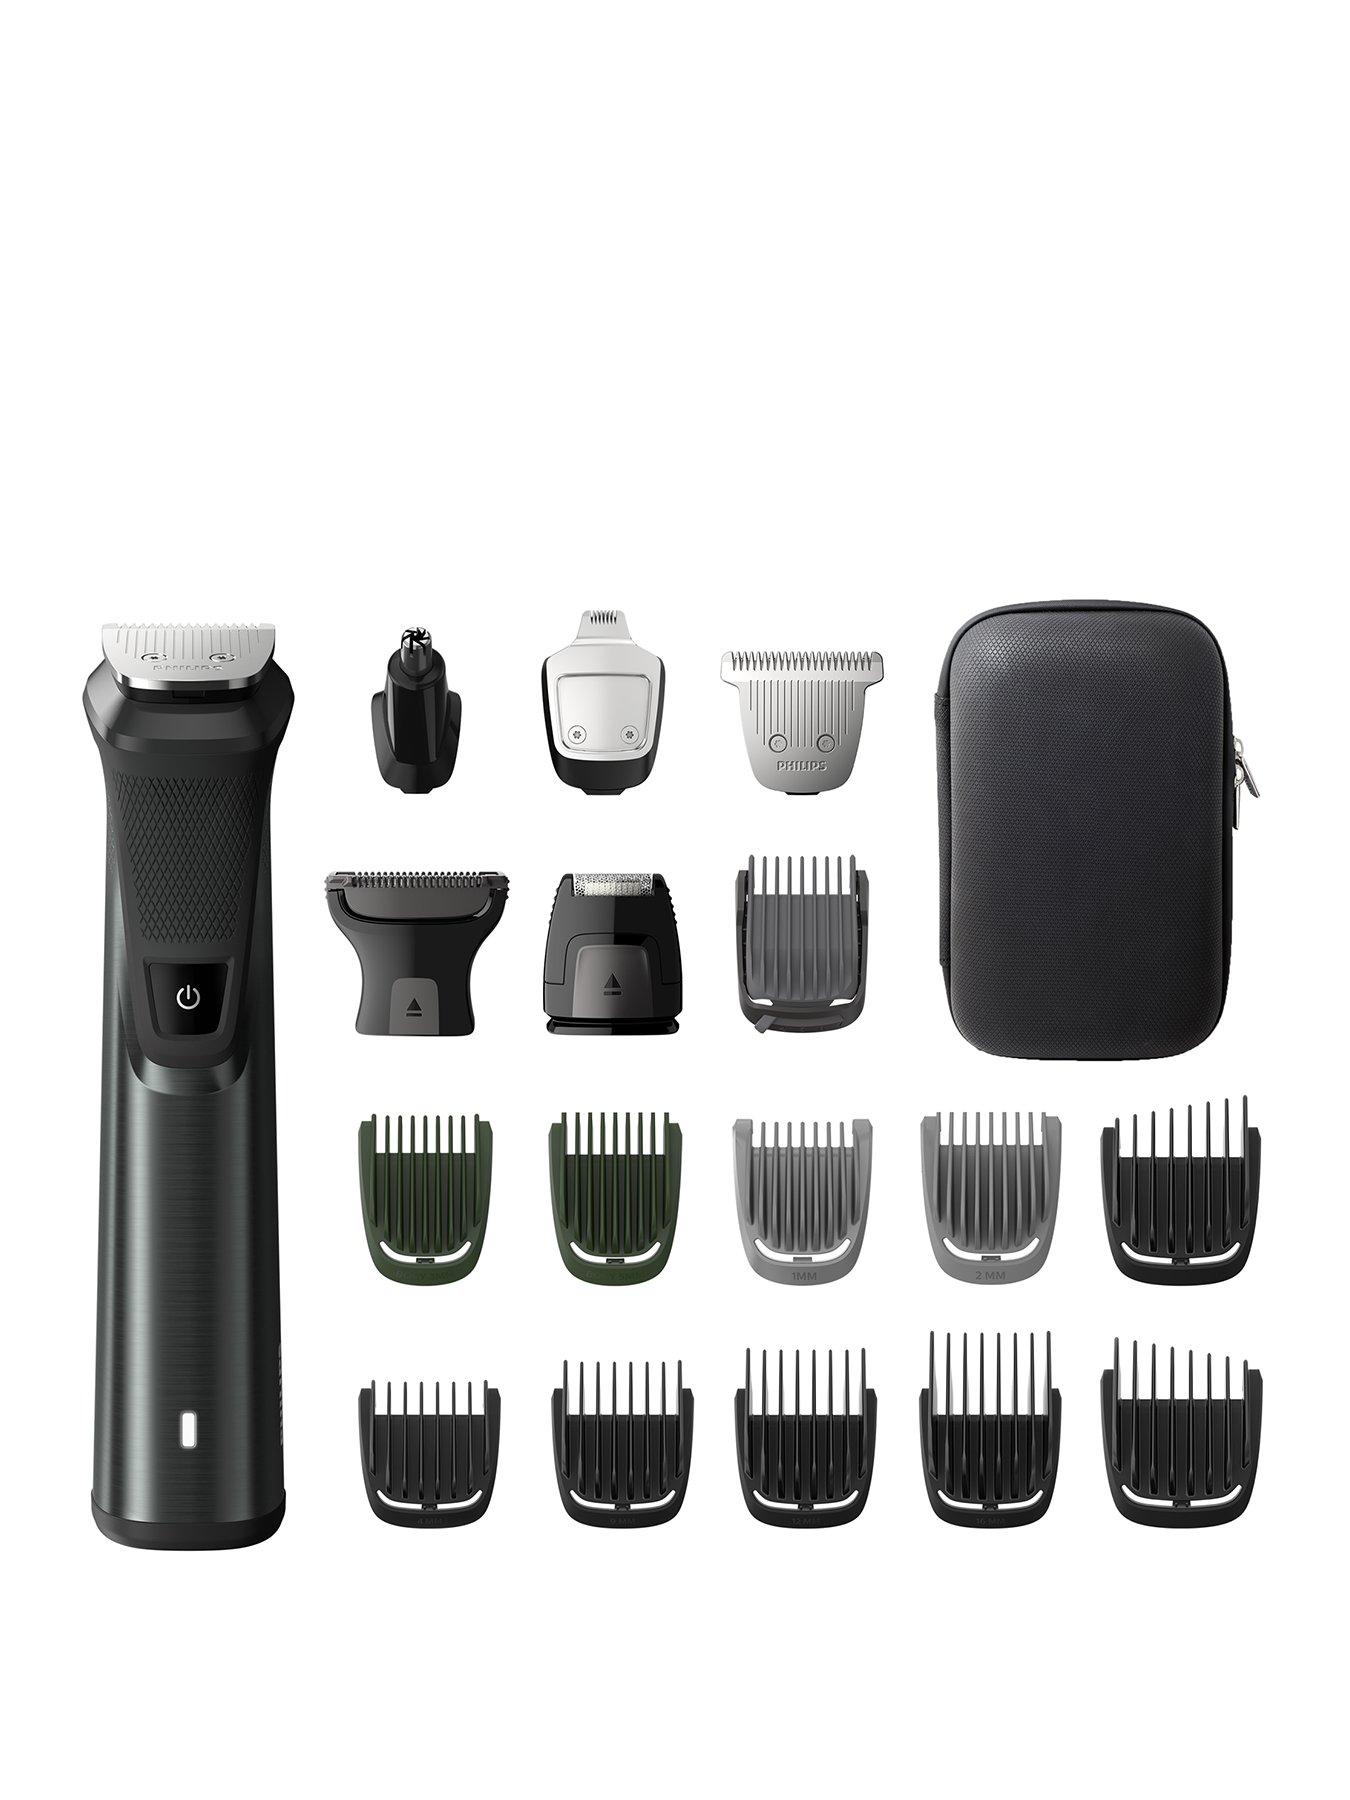 mens hand held hair clippers